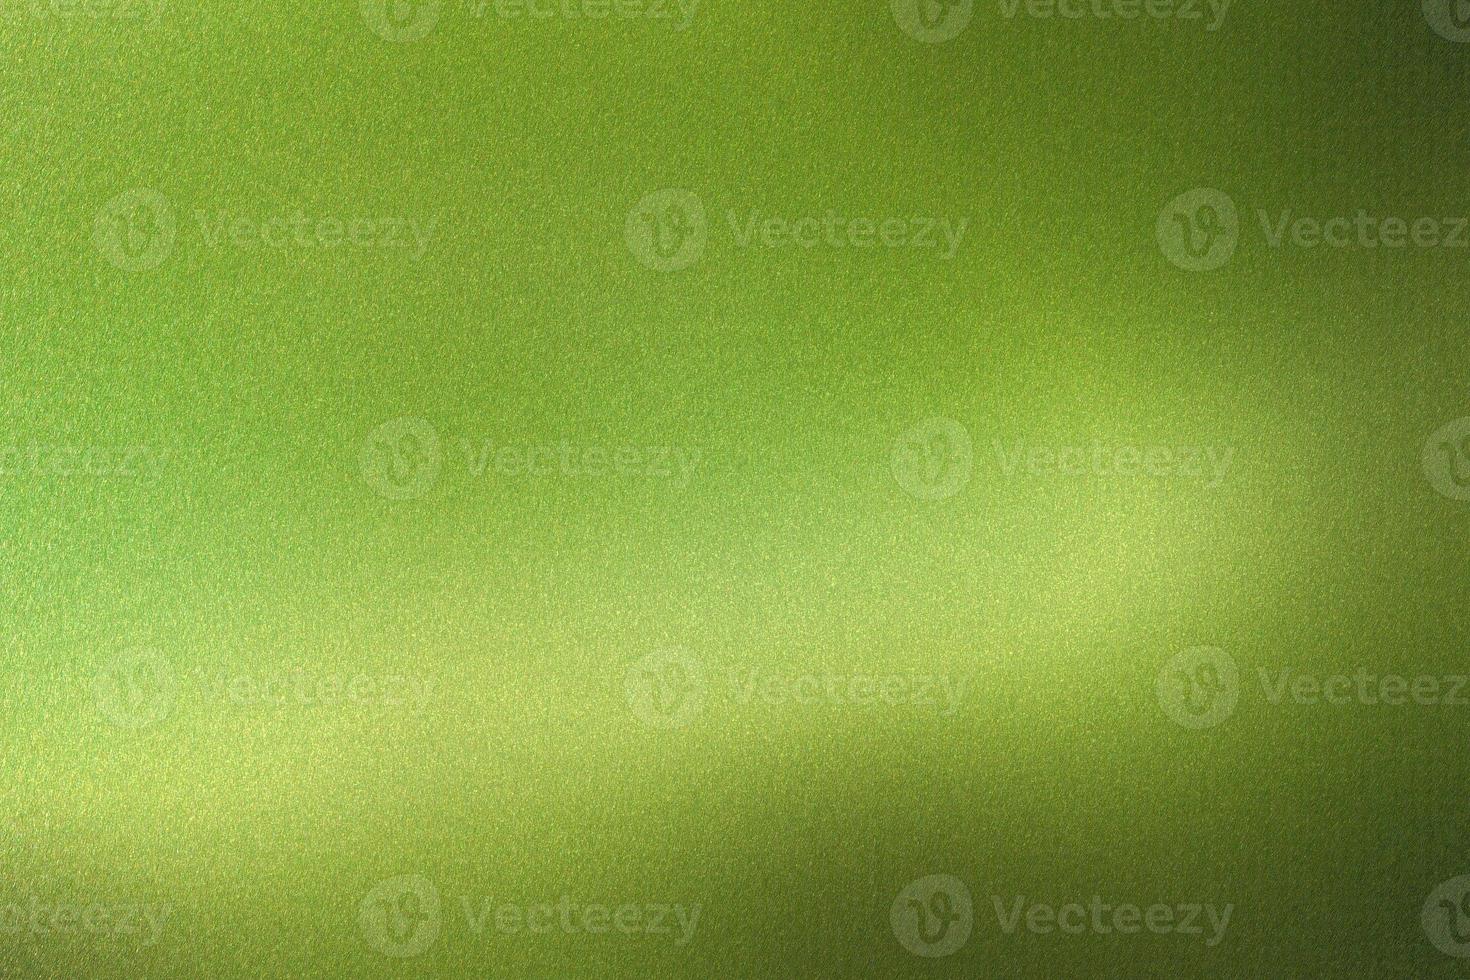 Glowing polished green steel plate, abstract texture background photo